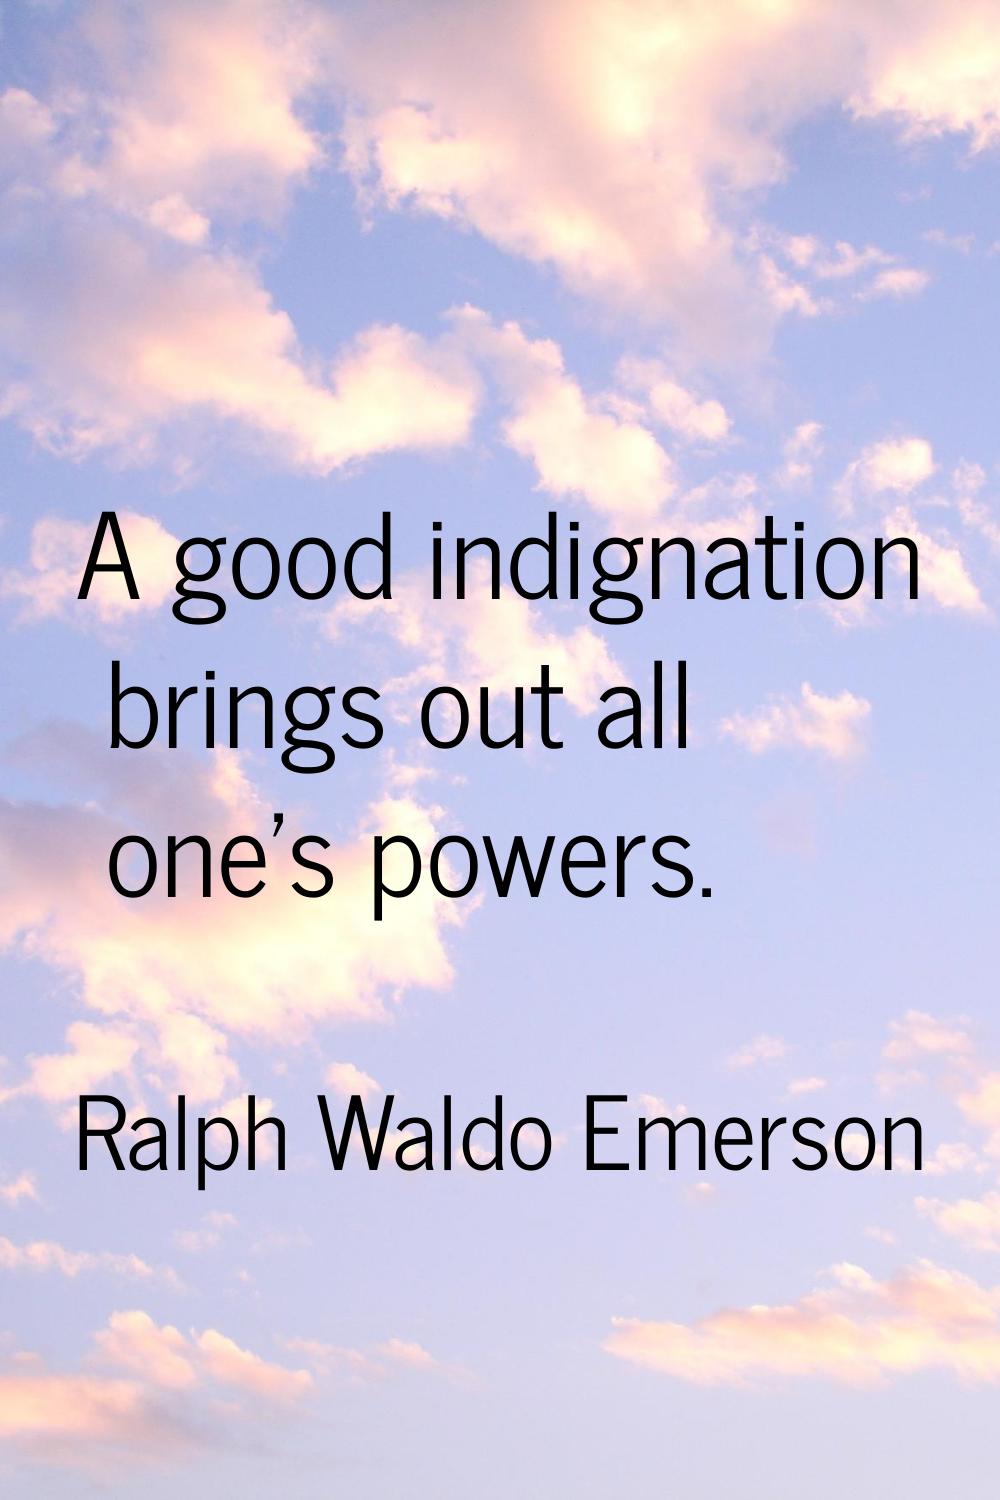 A good indignation brings out all one's powers.